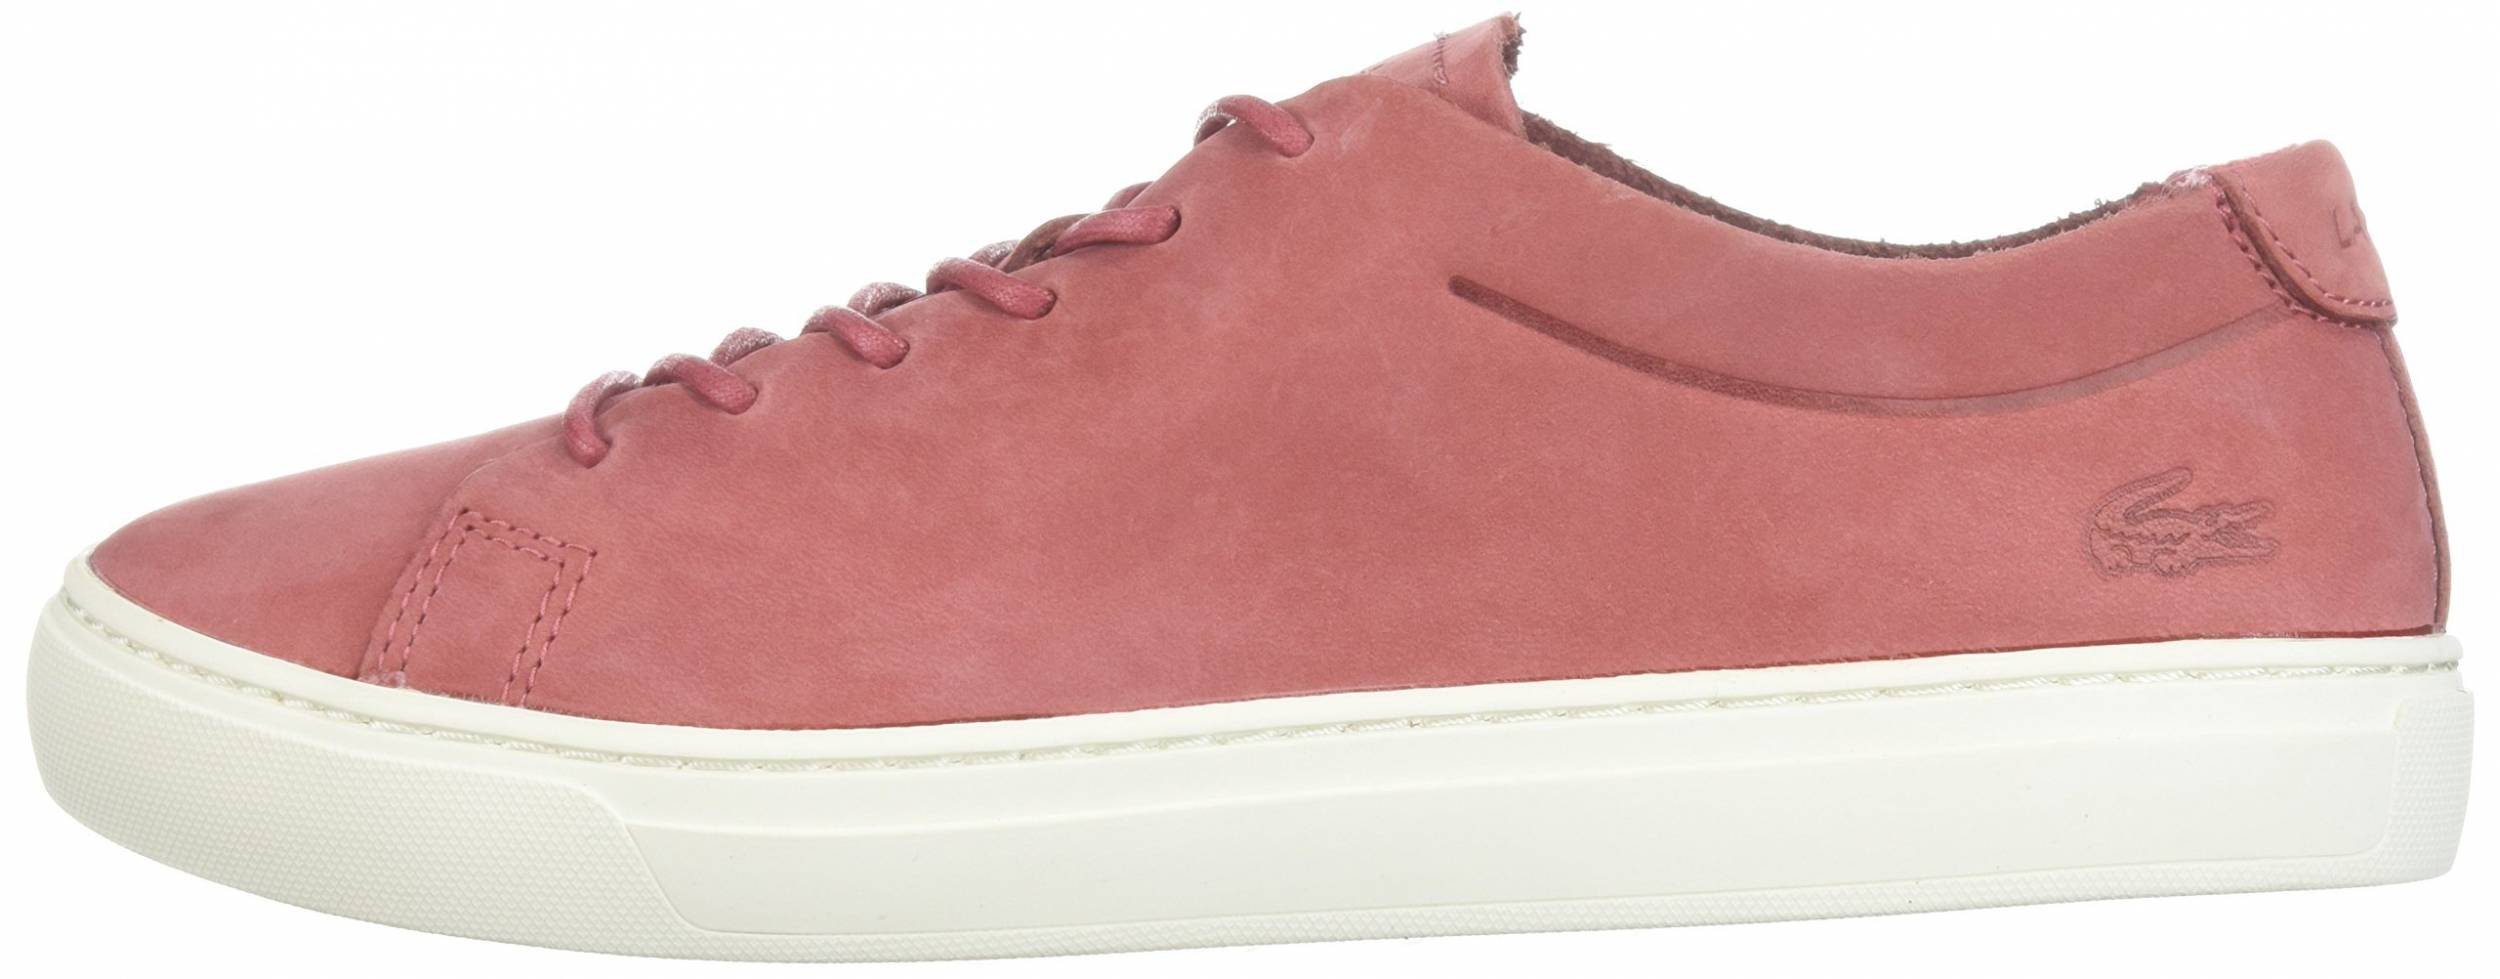 lacoste womens trainers pink